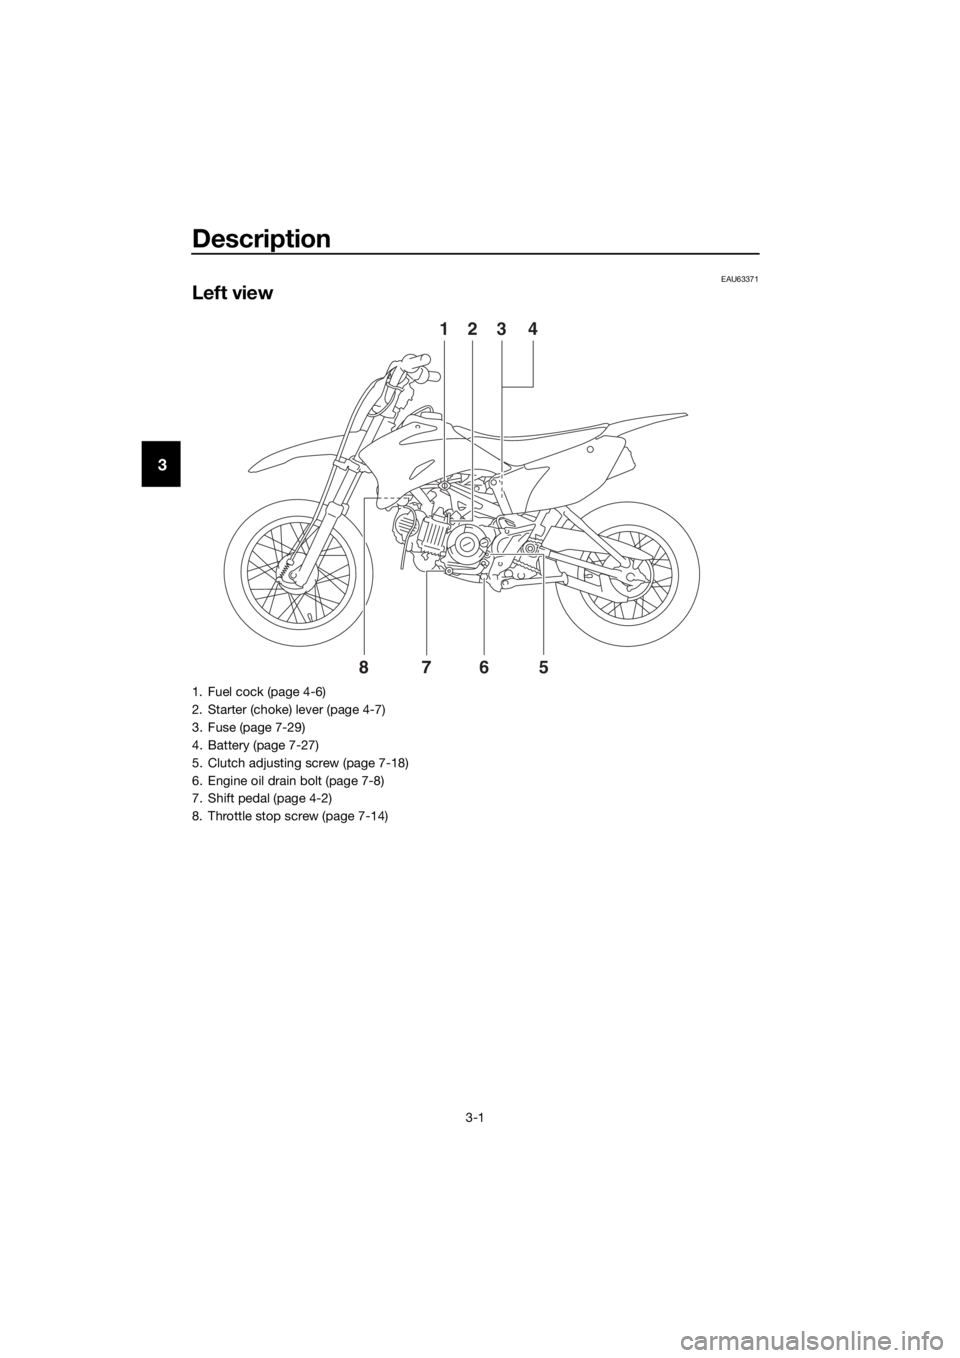 YAMAHA TT-R110E 2019  Owners Manual Description
3-1
3
EAU63371
Left view
678
123 45
1. Fuel cock (page 4-6)
2. Starter (choke) lever (page 4-7)
3. Fuse (page 7-29)
4. Battery (page 7-27)
5. Clutch adjusting screw (page 7-18)
6. Engine o